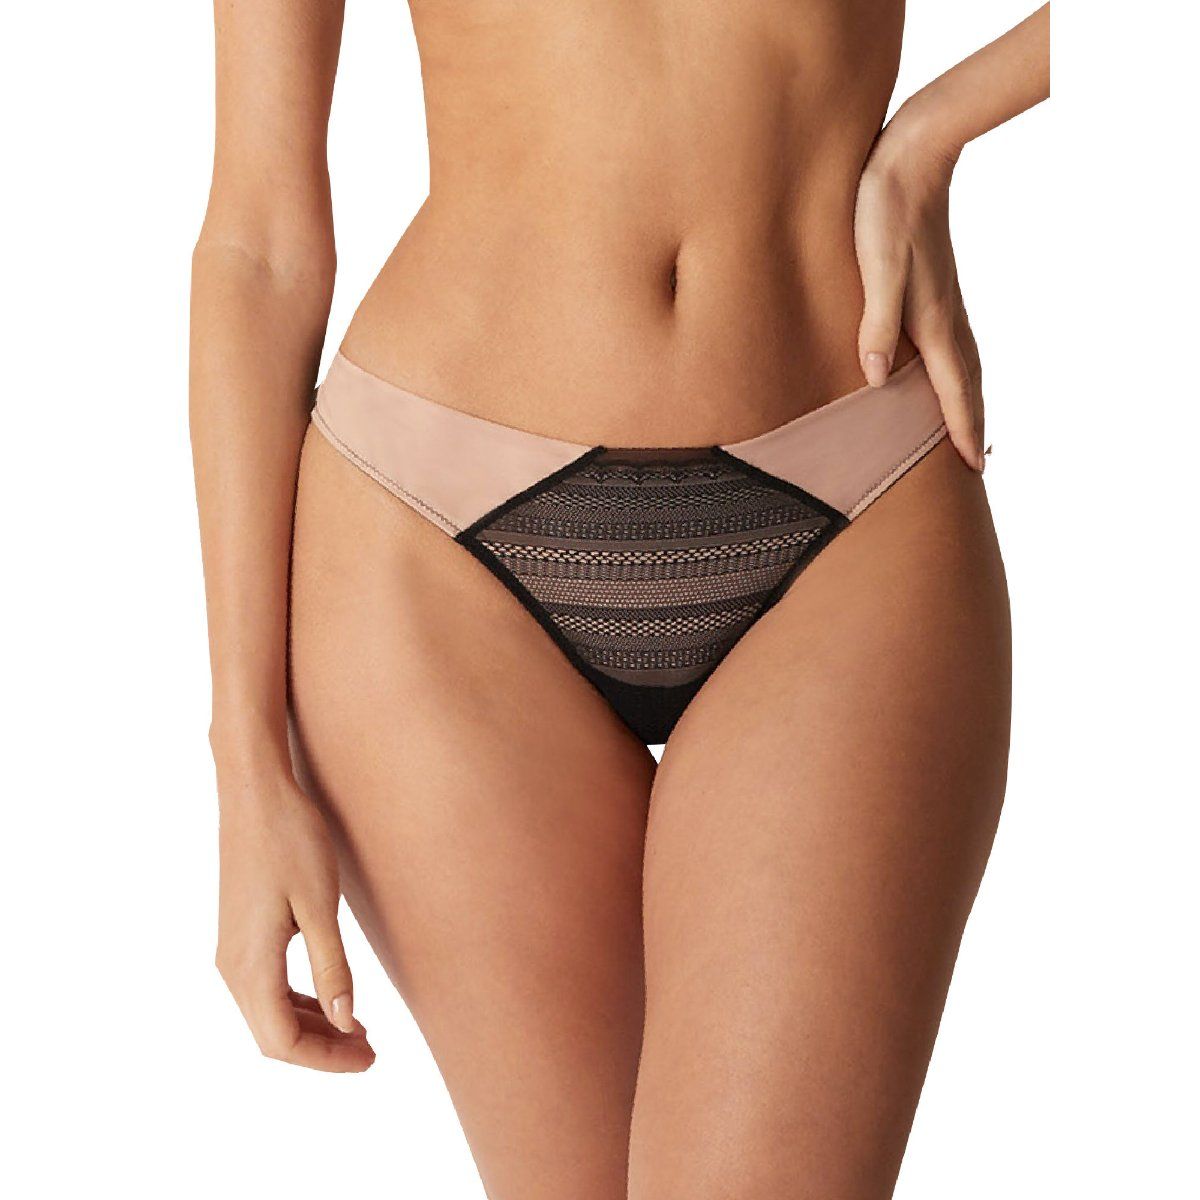 Yamamay - Simple nude toned design with an intimate, lined mesh